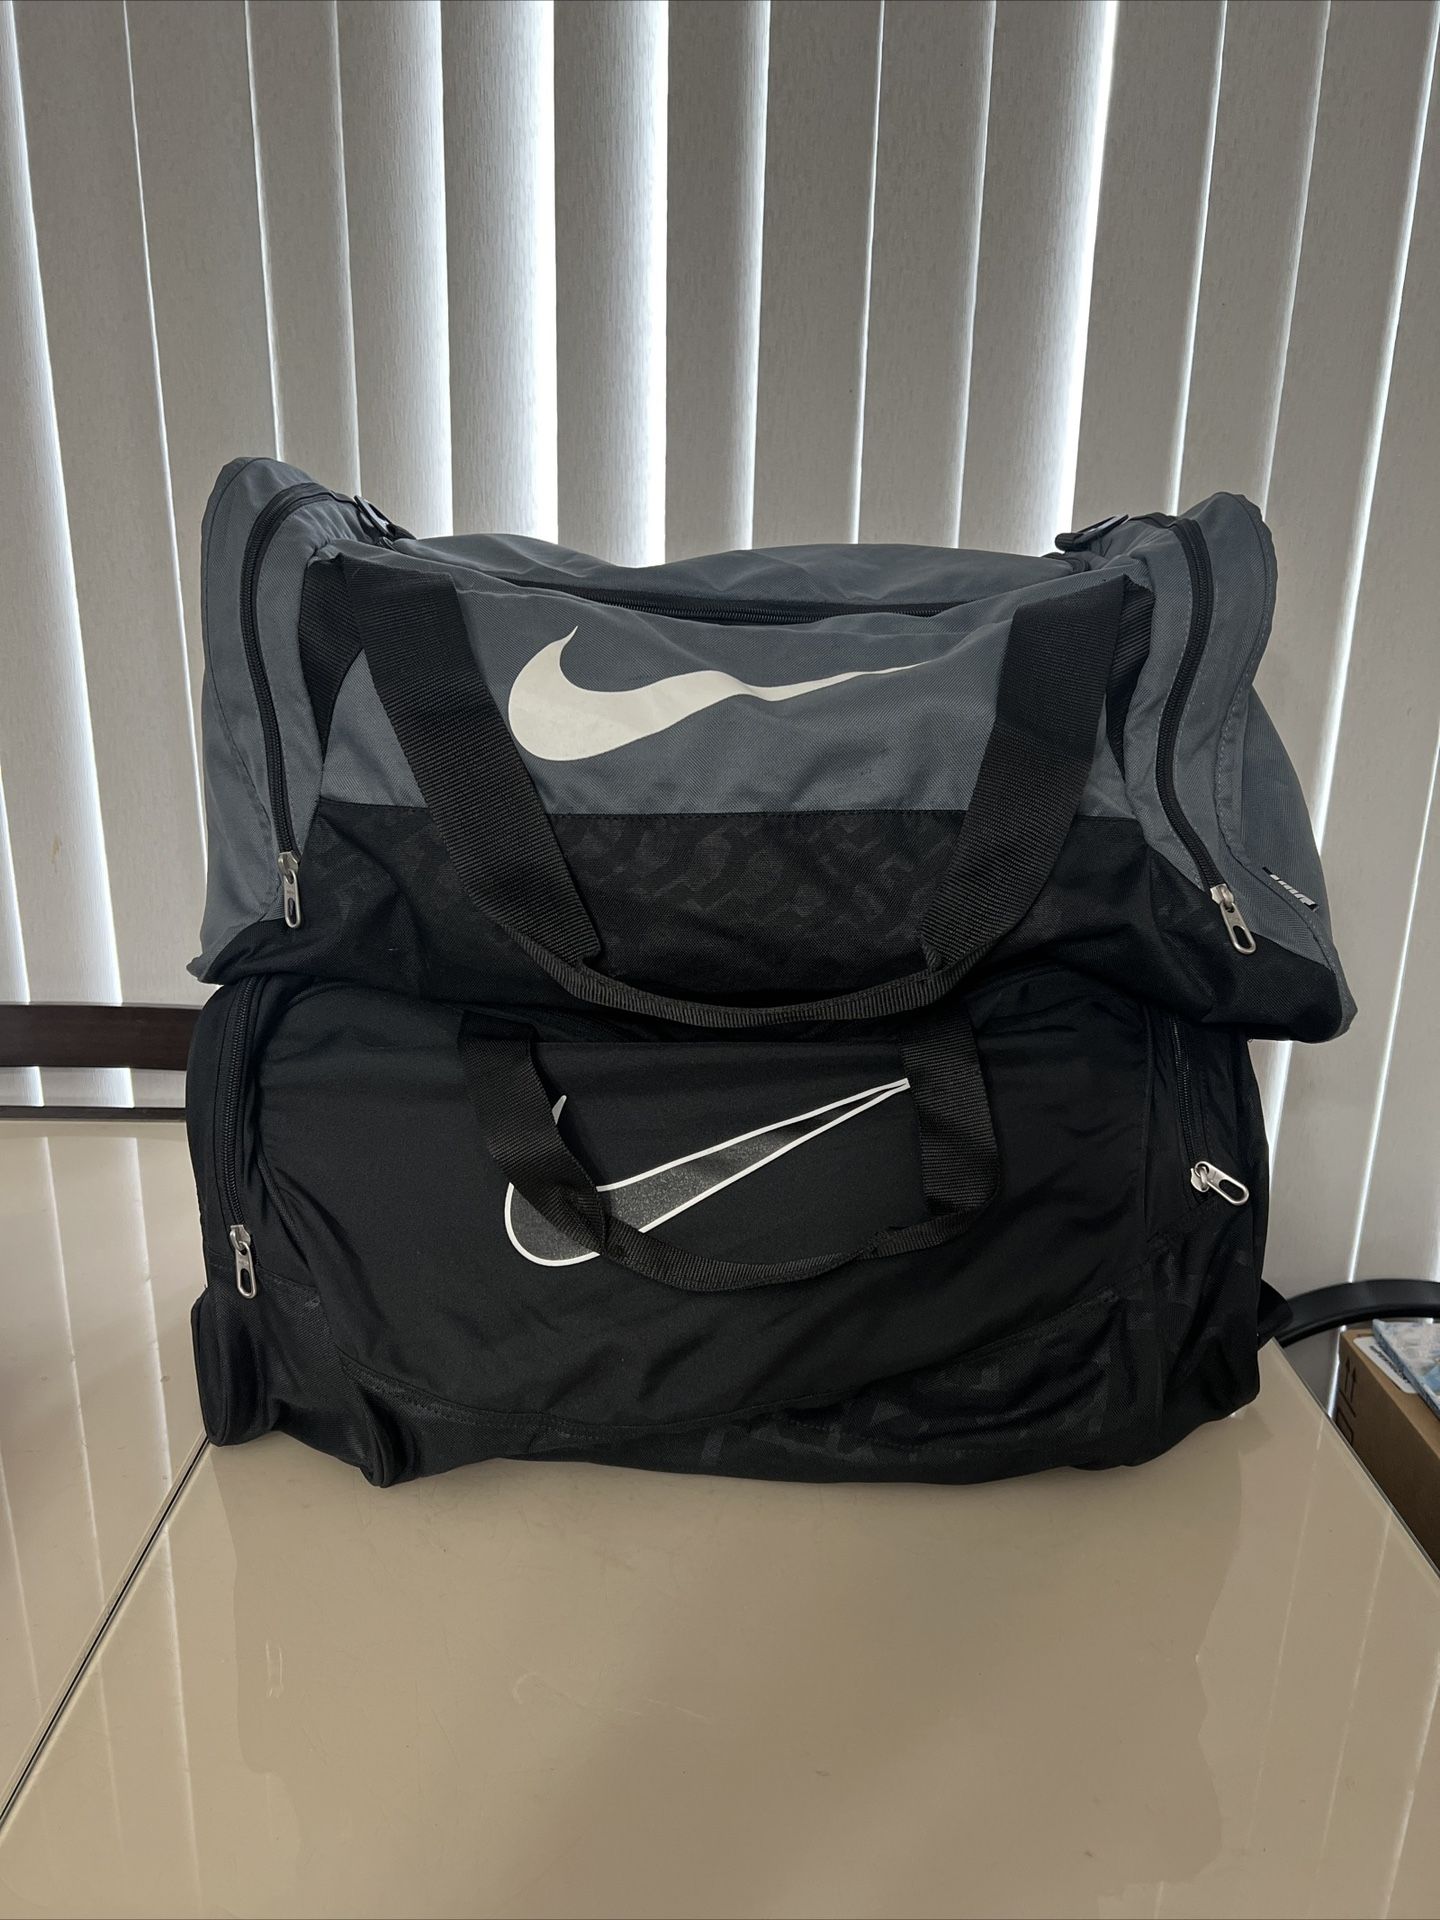 Nike Duffle Gym Medium Bag Black  Shoulder Strap Nike Gray Duffle Bag Lot Of Two. Up for sale these 2 Nike duffle bags. Both are in good cosmetic cond